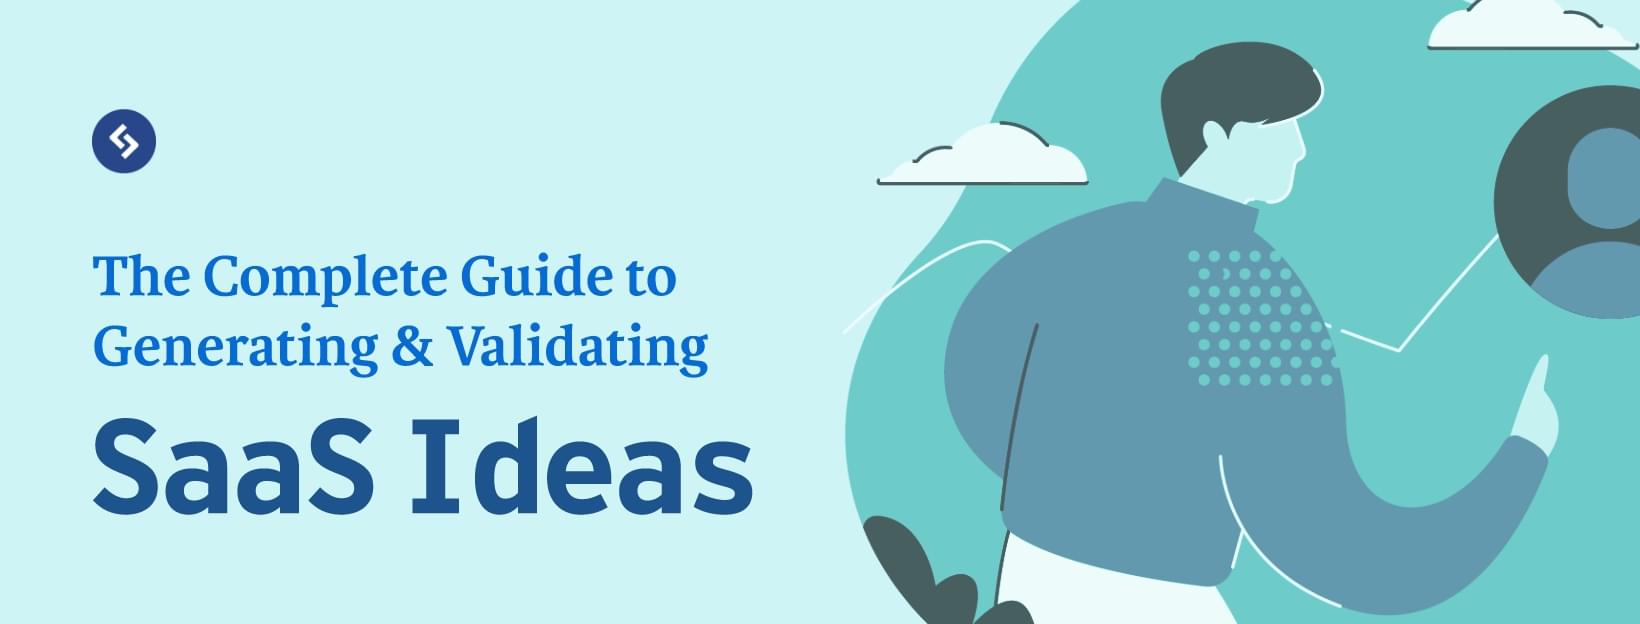 The complete guide to generating and validating SaaS ideas